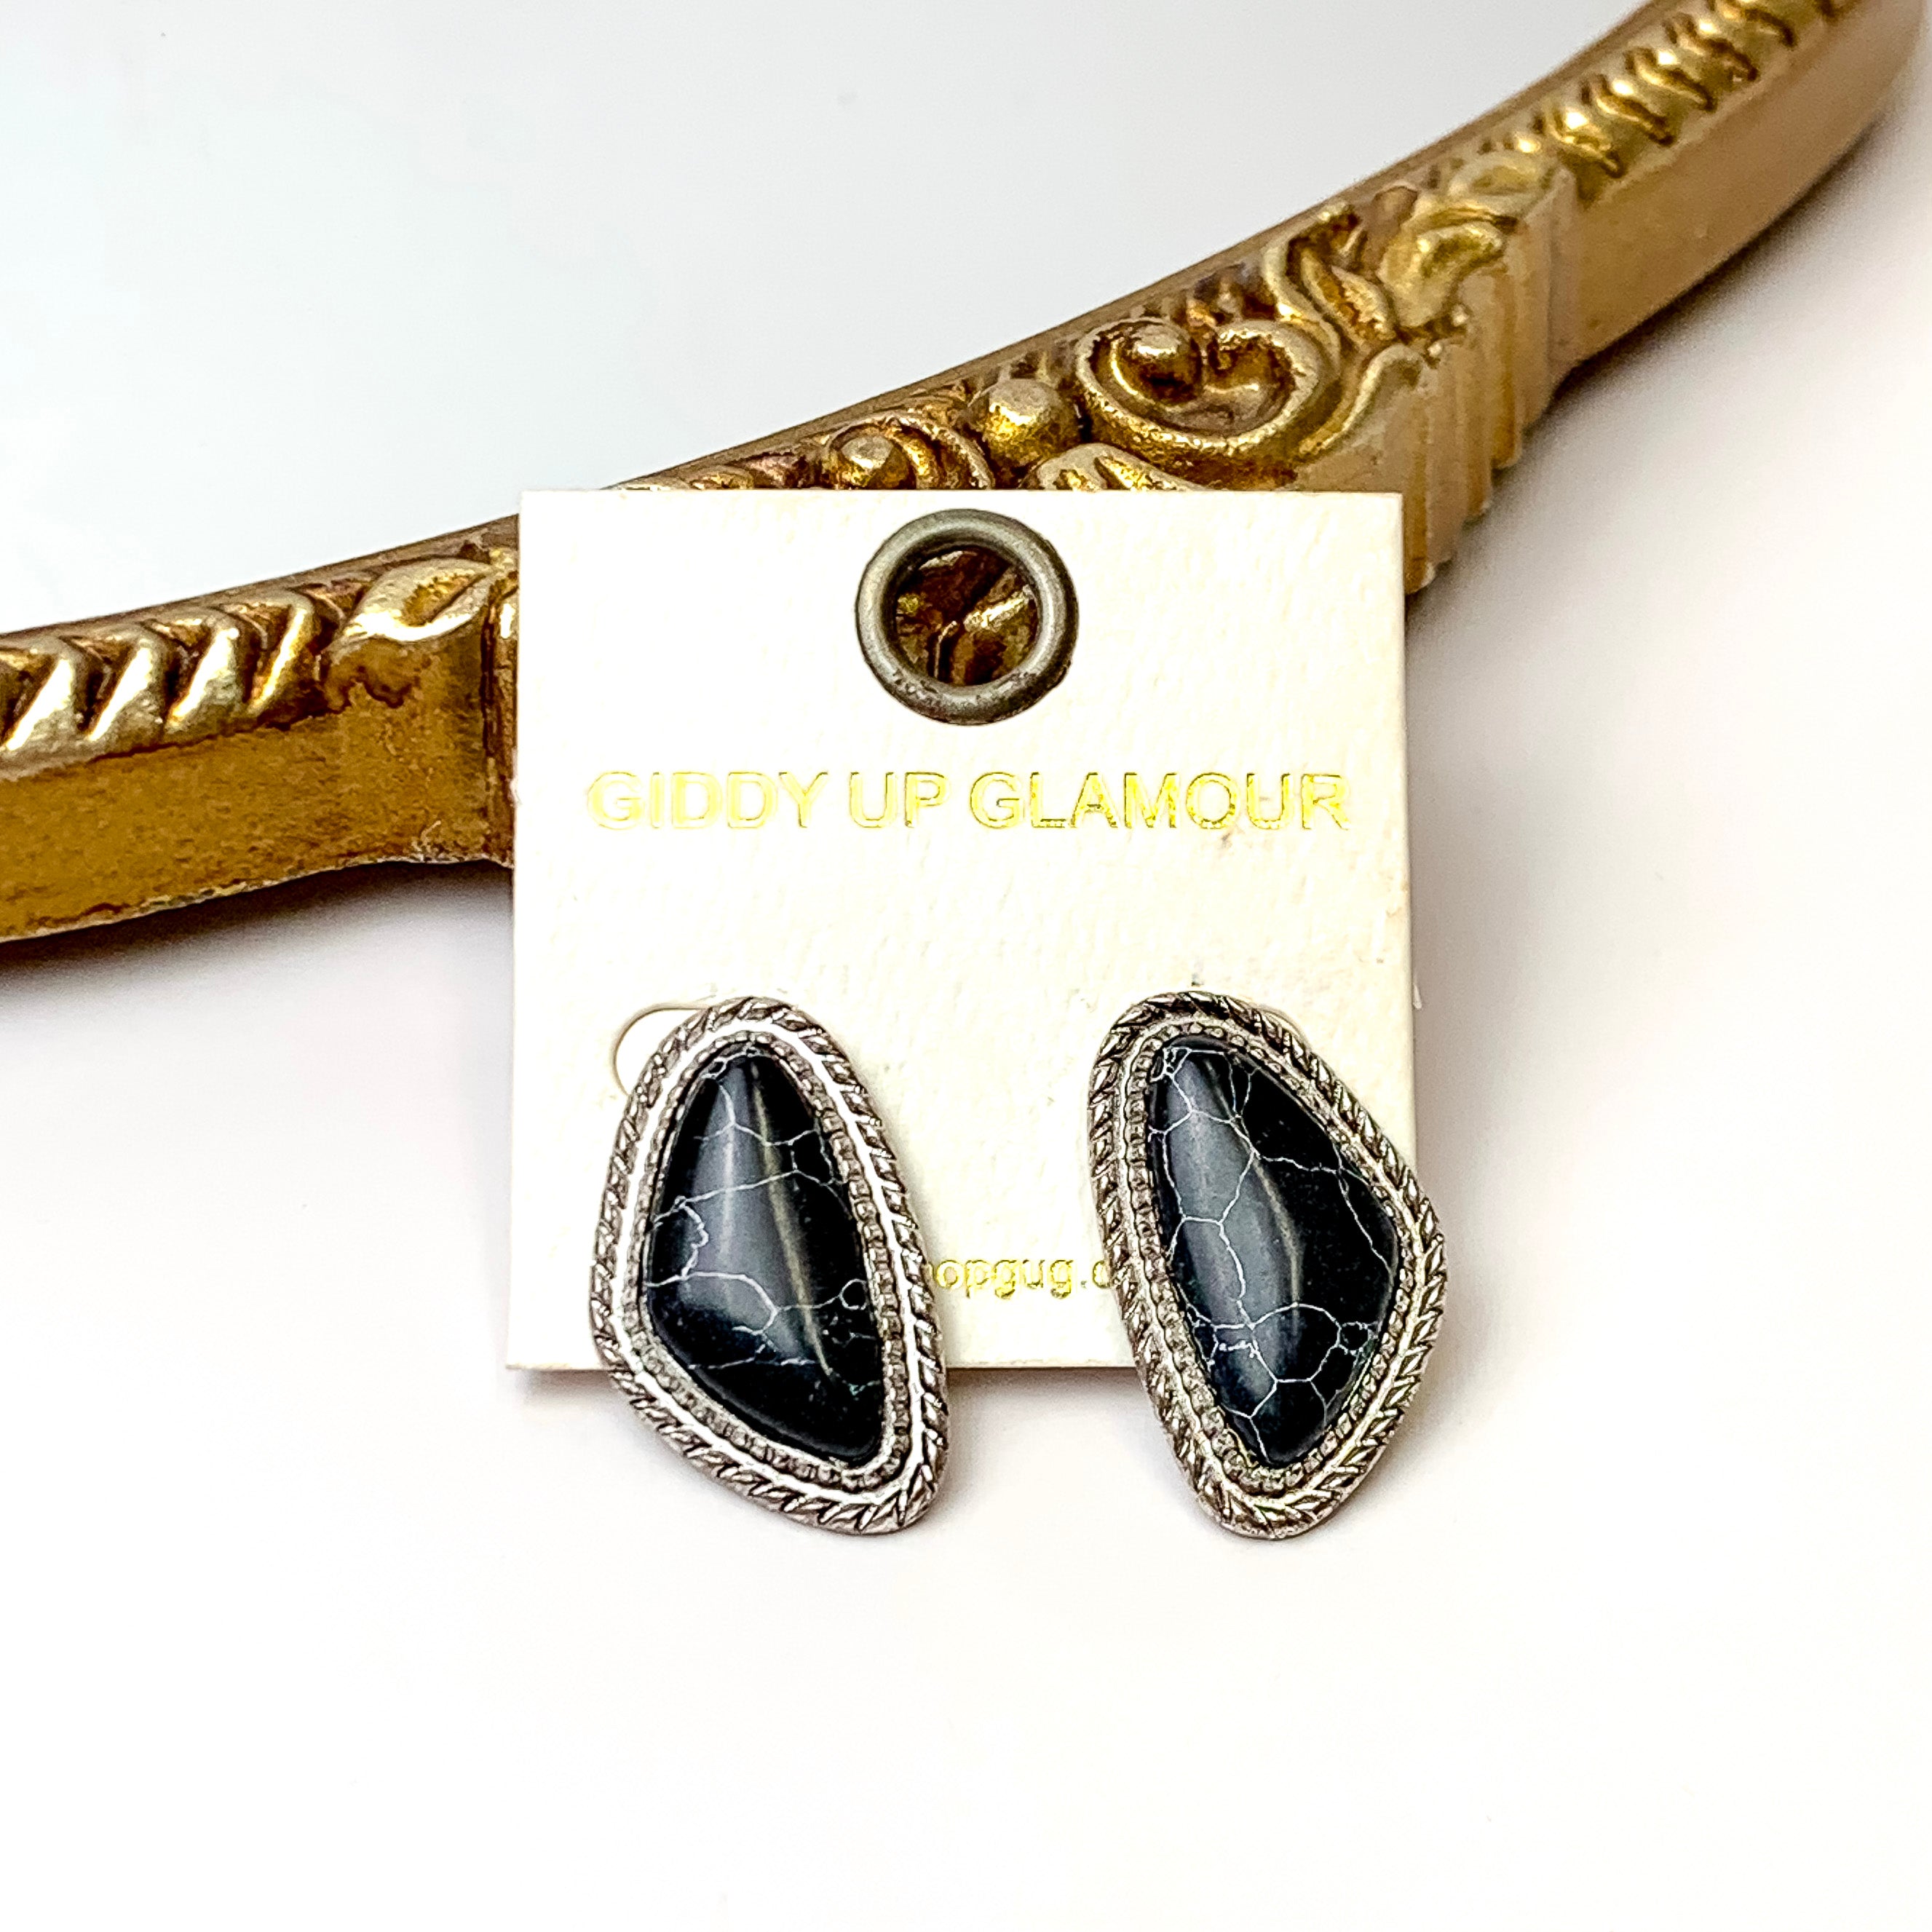 Silver Tone Irregular Shaped Faux Stone Post Earrings in Black - Giddy Up Glamour Boutique